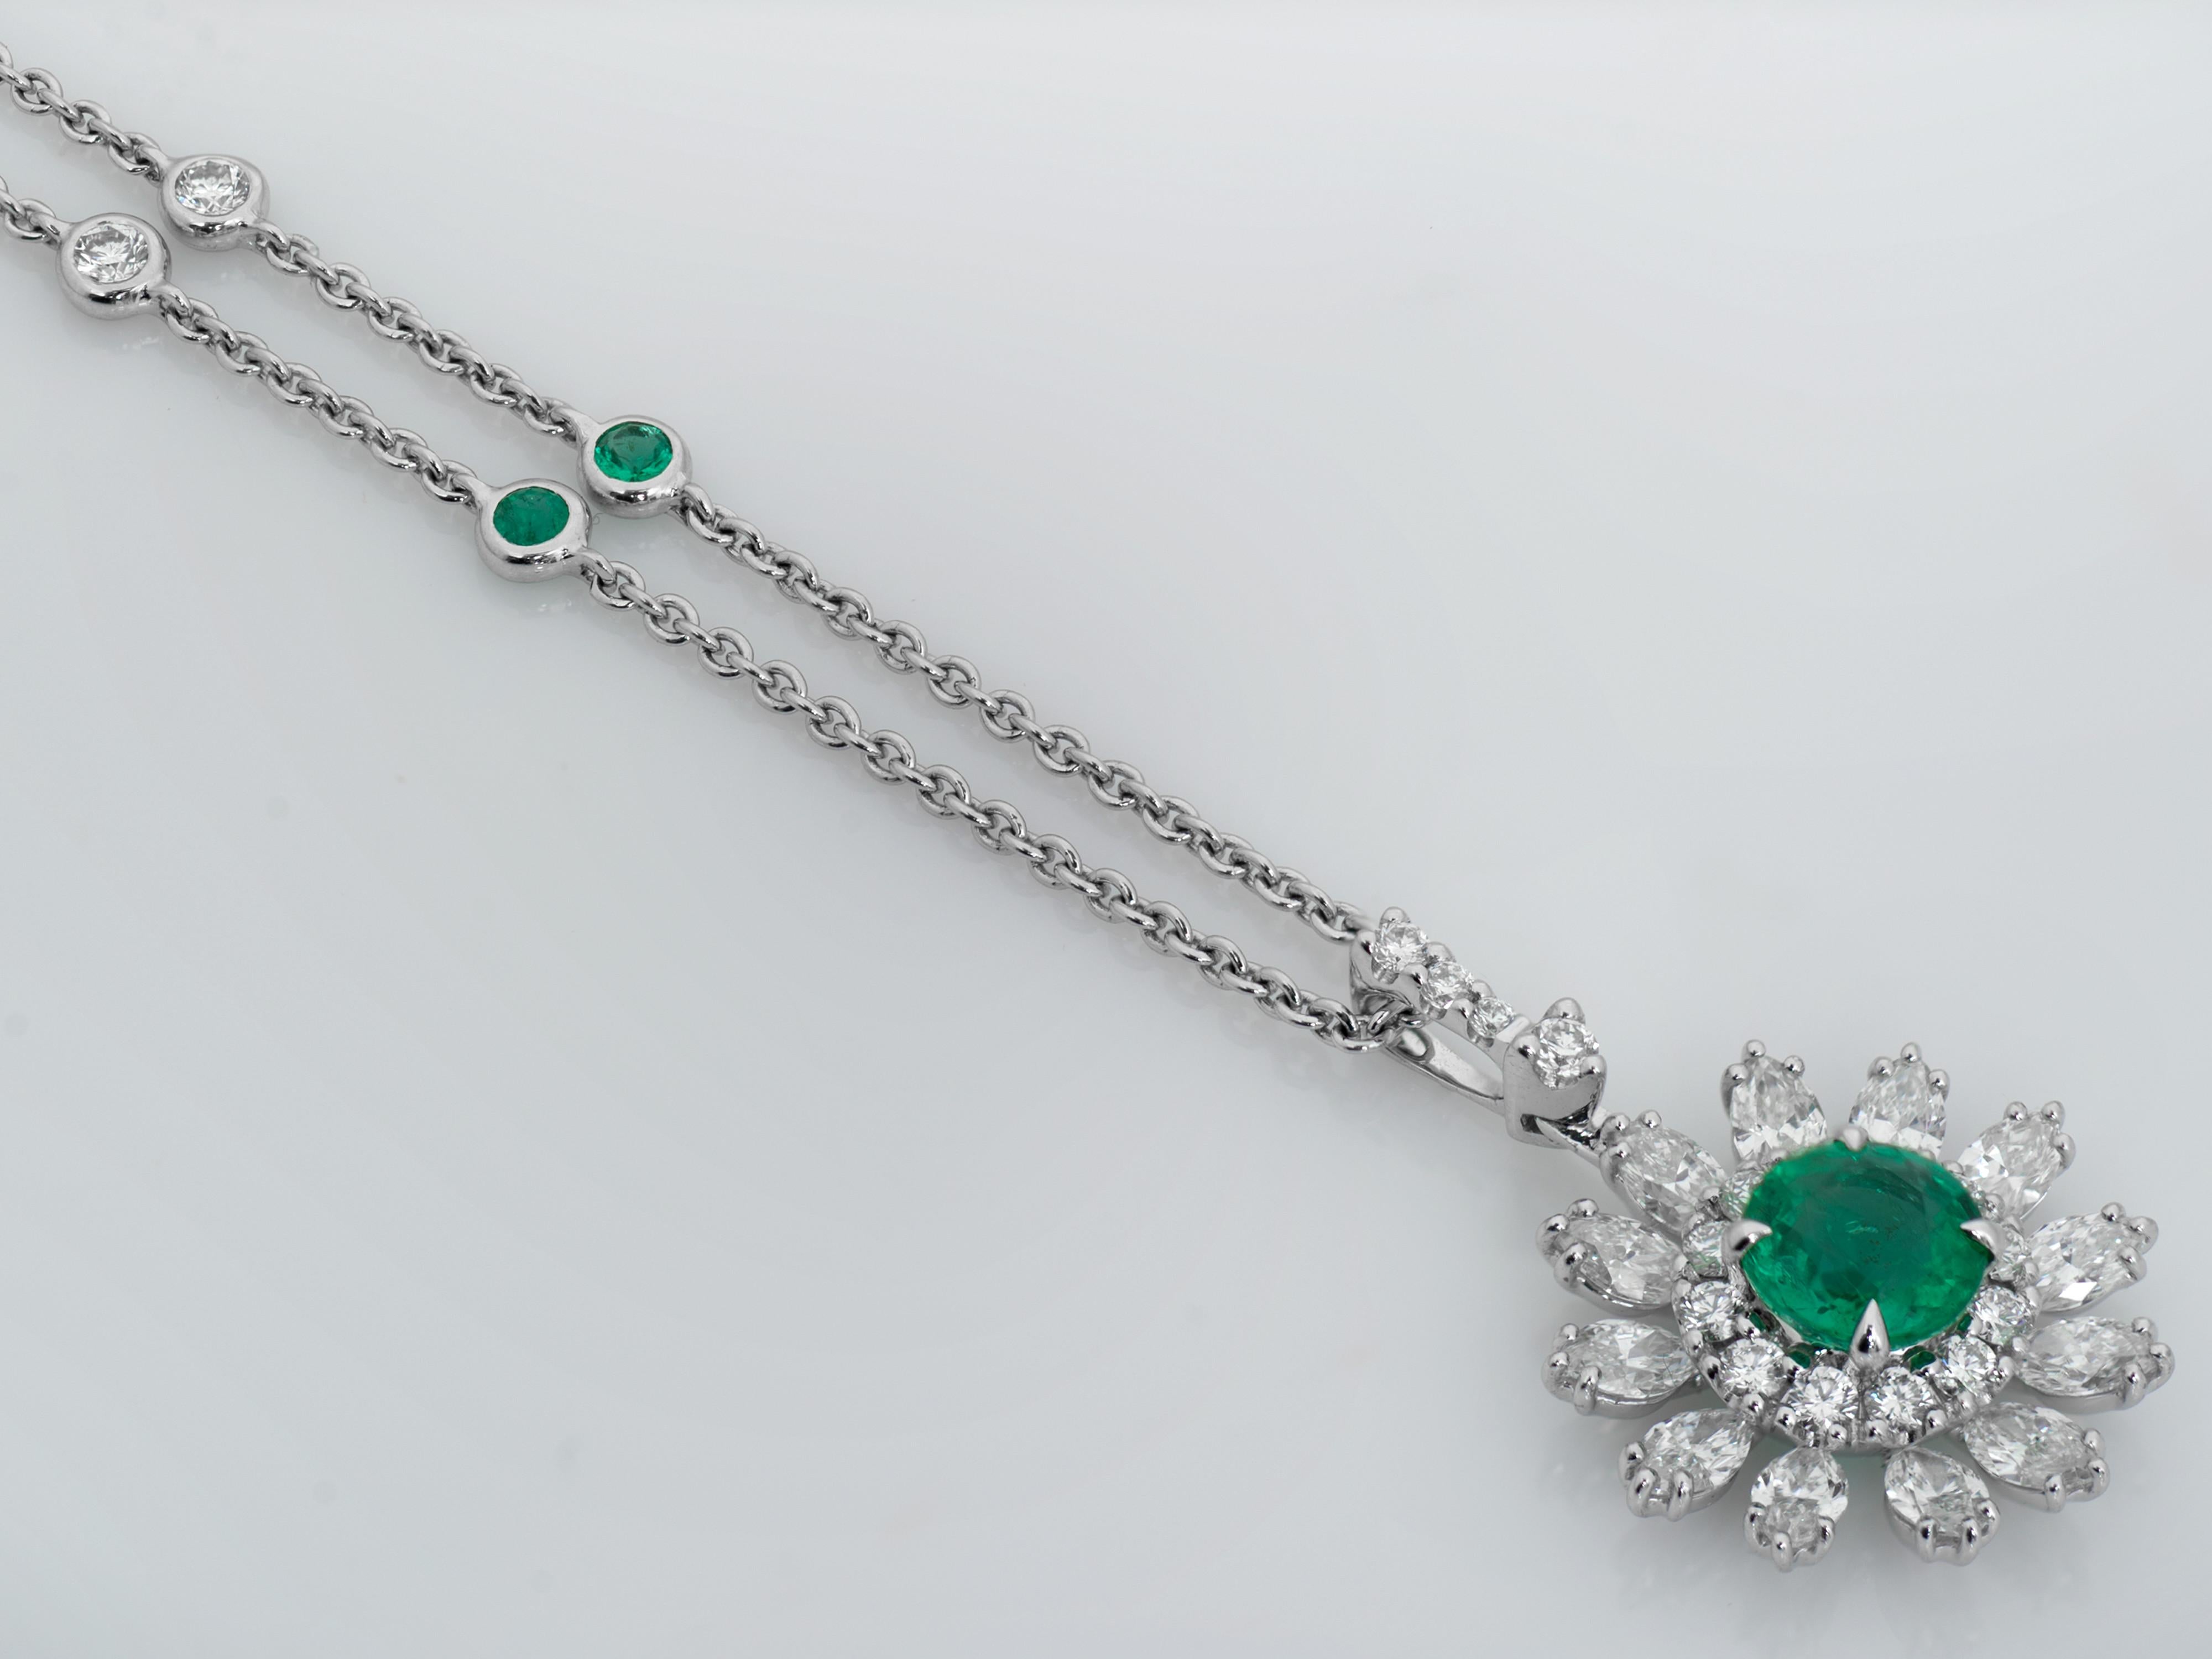 Ladies beautiful diamond and emerald pendant in 18kt white gold. Pendant contains a .94 carat of a round emerald in the centre of the flower, which is surrounded by 12 small round diamonds, as well as 12 oval diamonds set in the form of the flower's